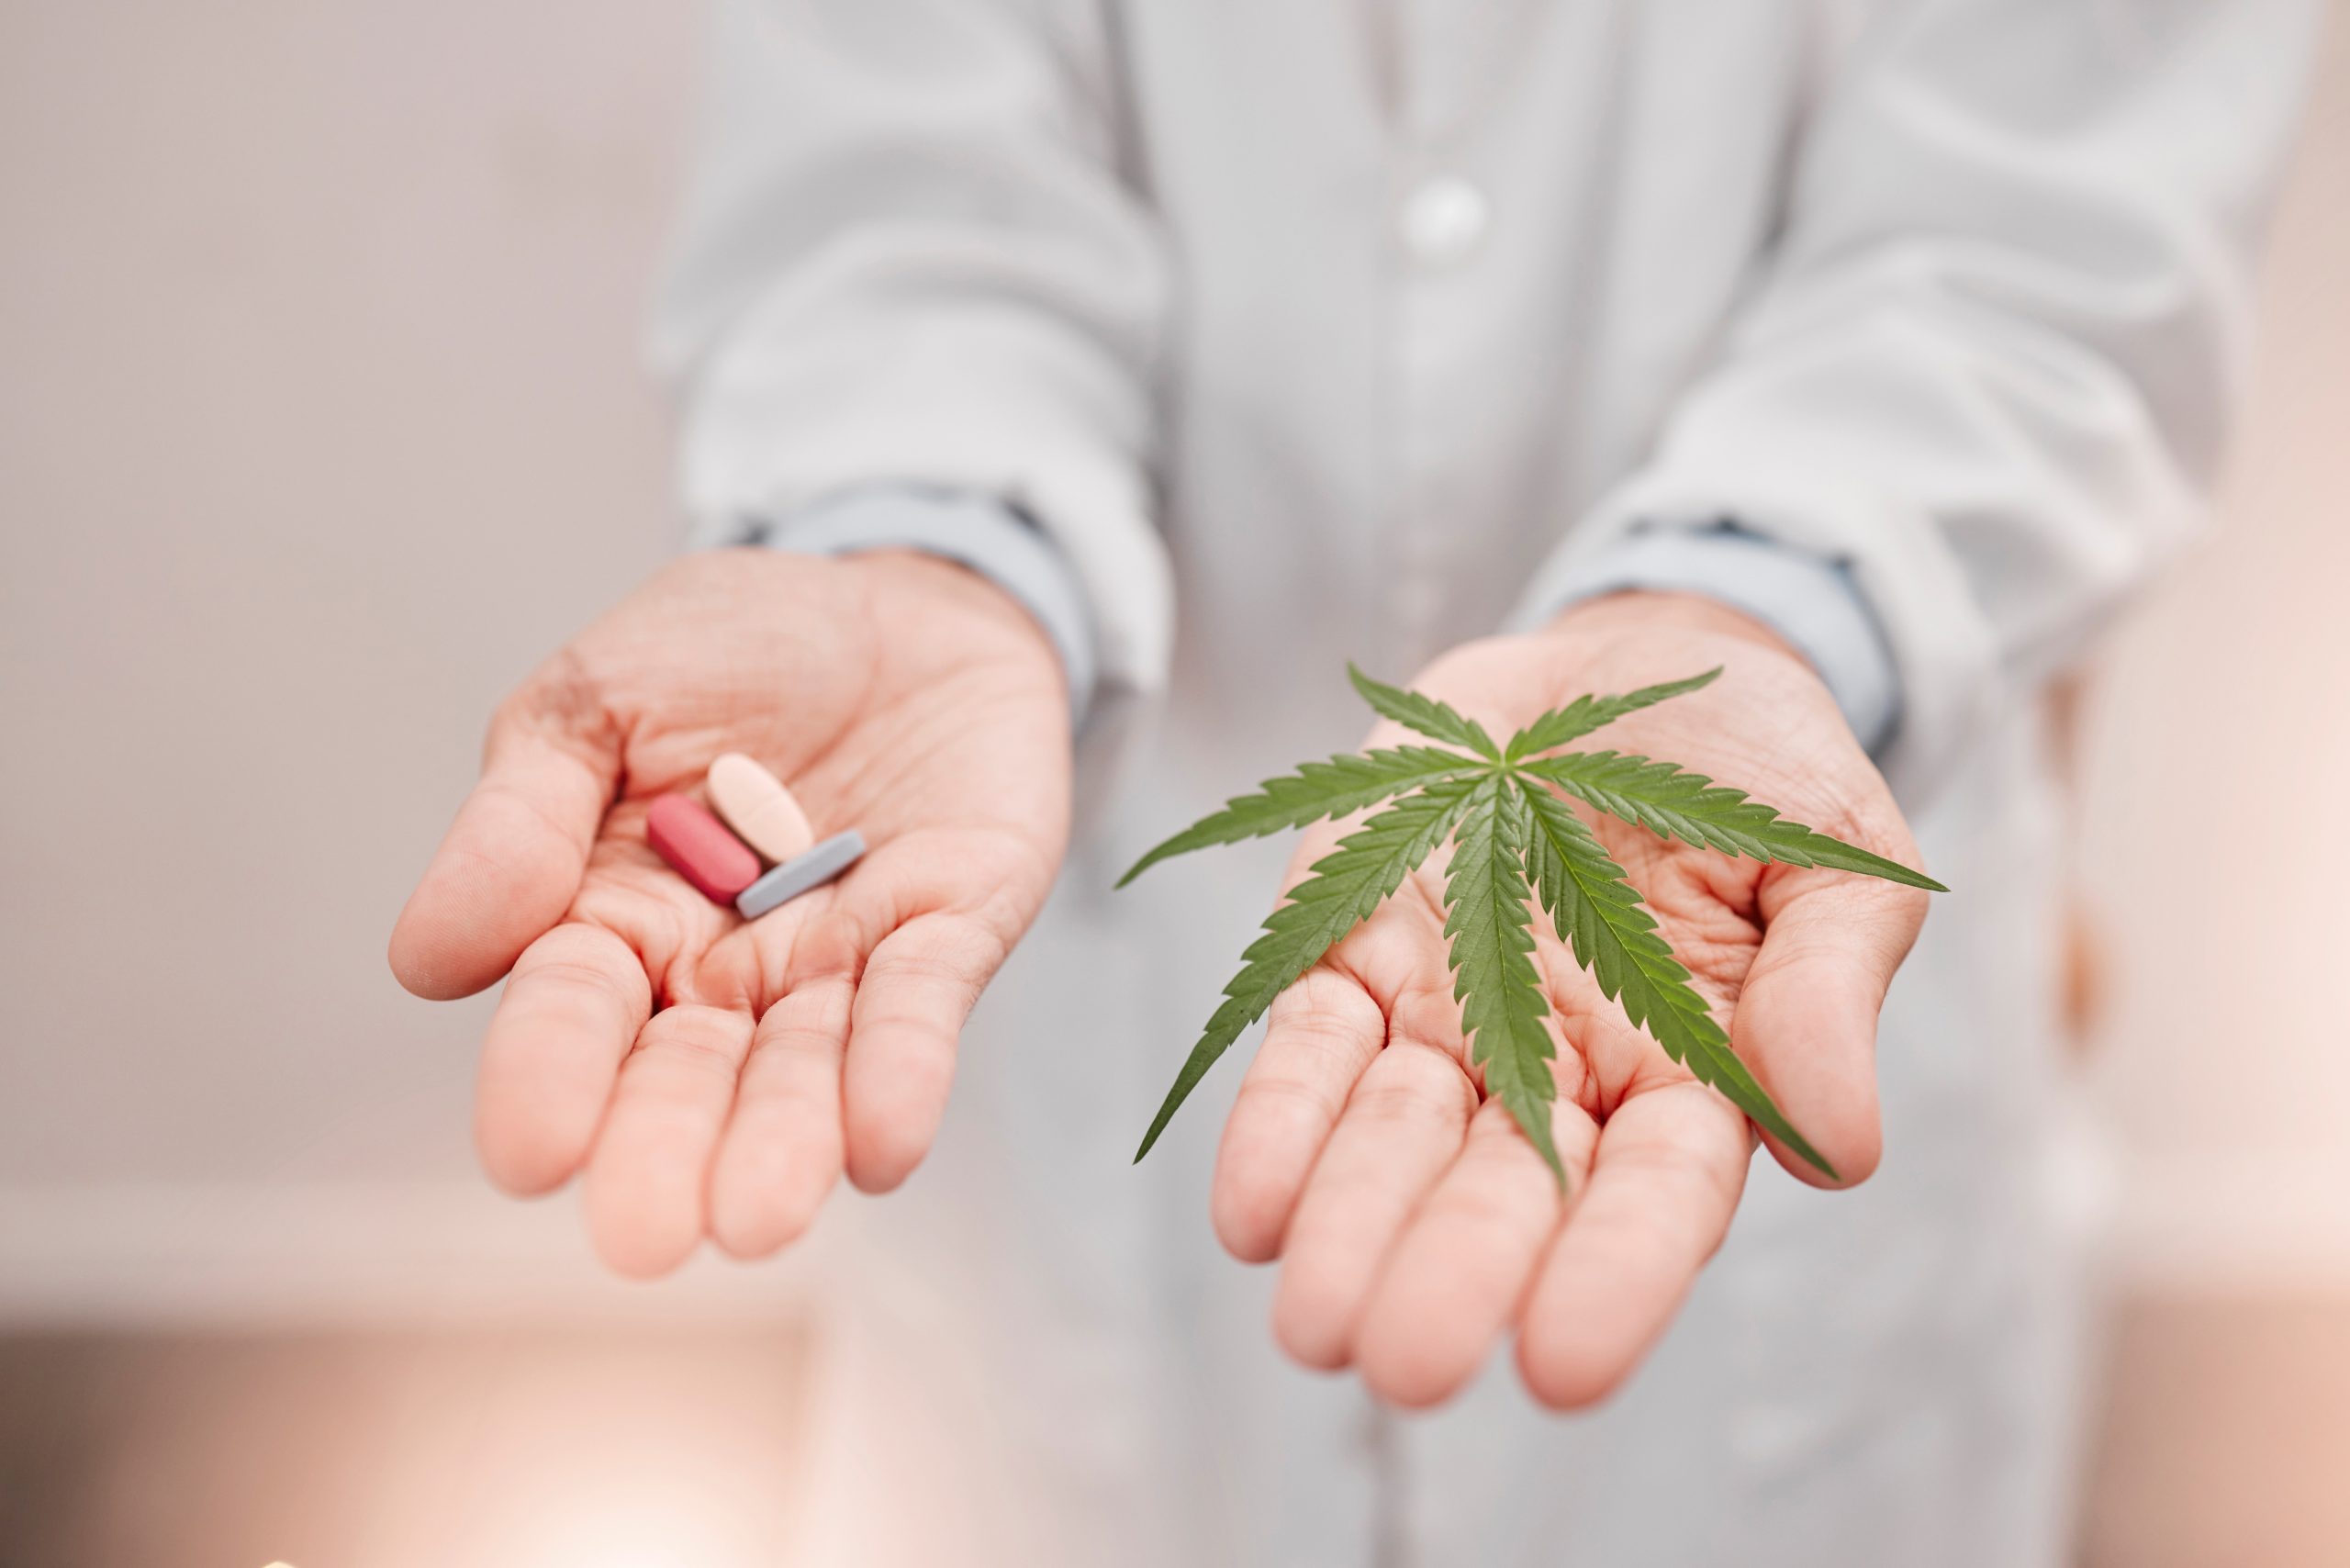 Cannabis for Pain Management: What Science Says